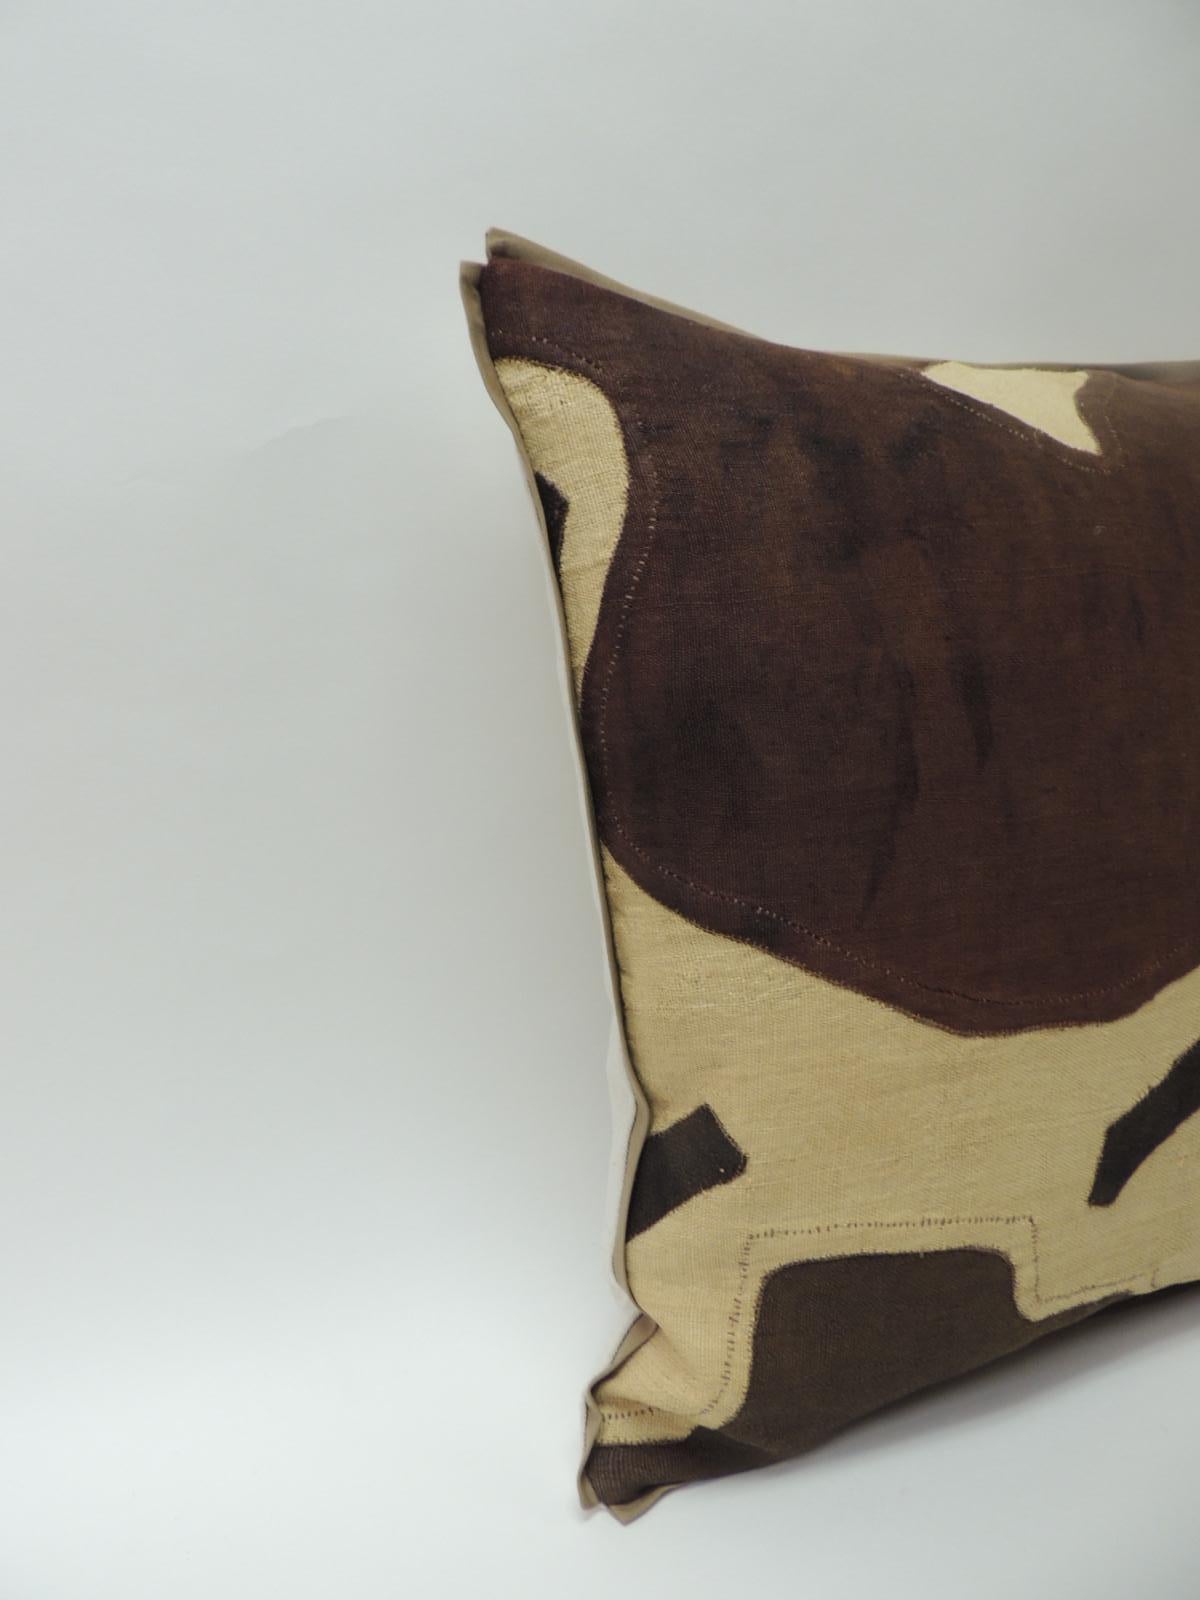 Applique raffia, patchwork and applique brown, black and natural decorative pillow
Custom flat cotton trim in earth-tone khaki color all around. Natural cotton and linen backing. Pillow hand-crafted and designed in the USA with custom made